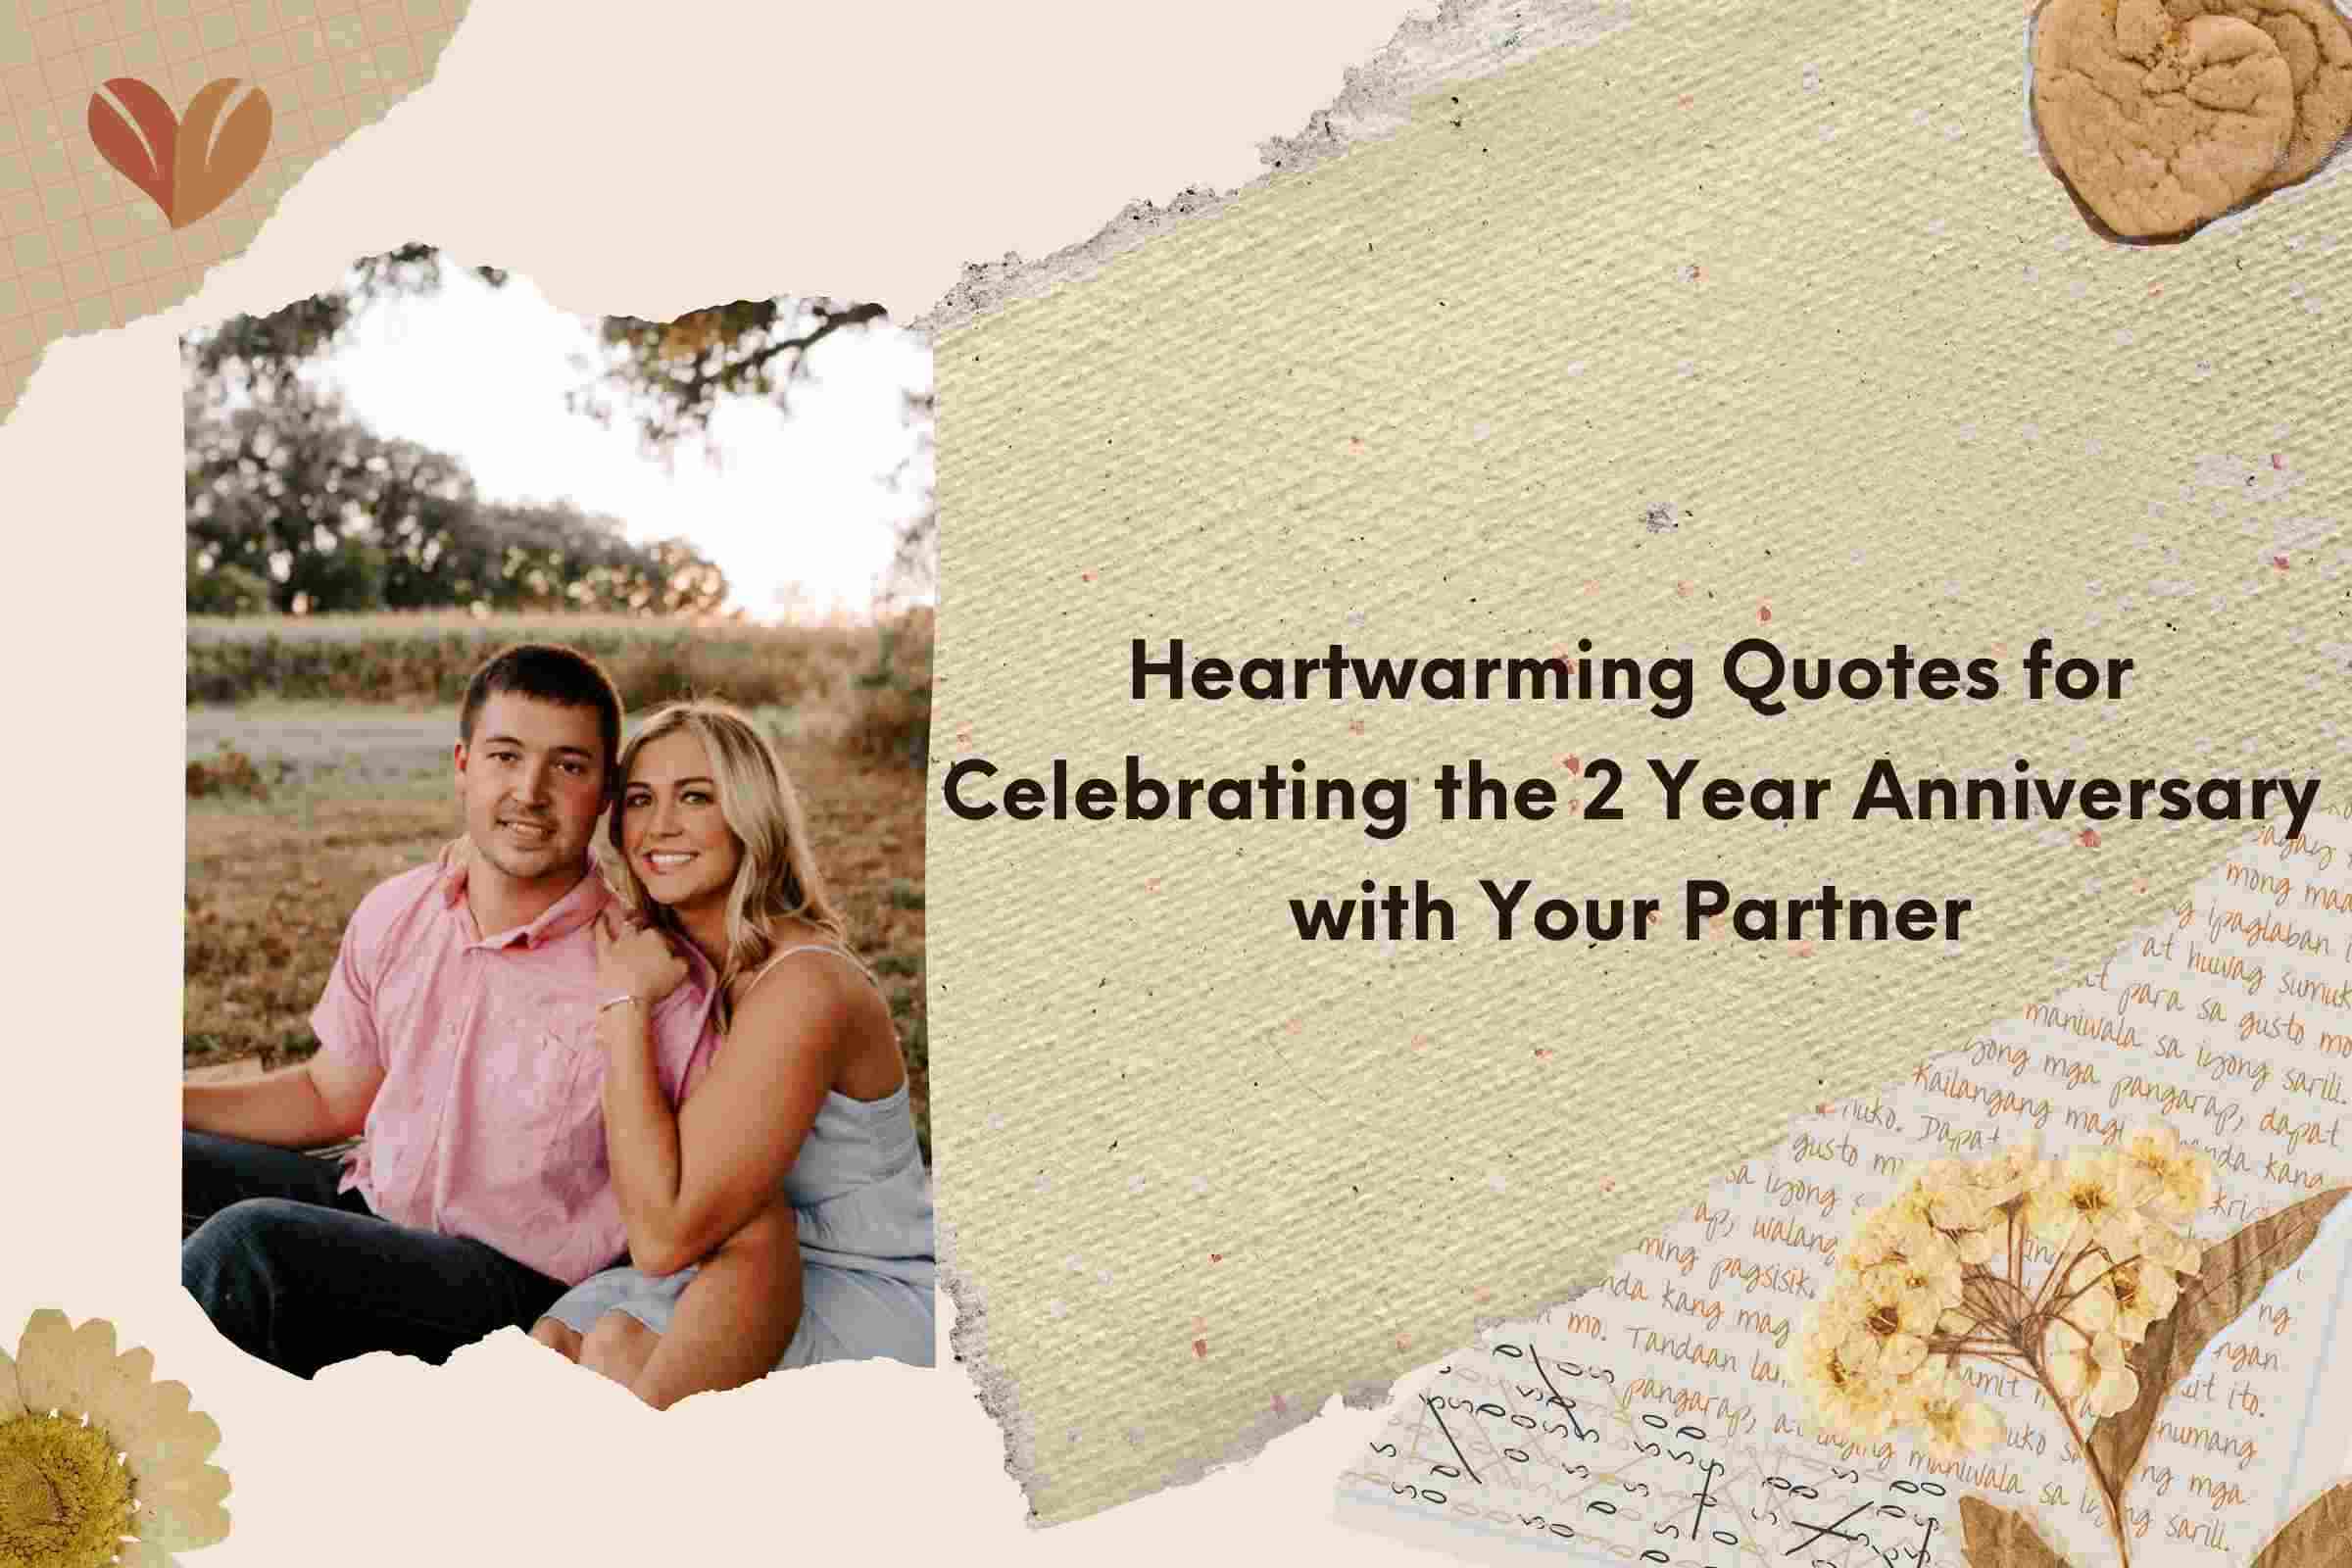 Heartwarming Quotes for Celebrating the 2 Year Anniversary with Your Partner